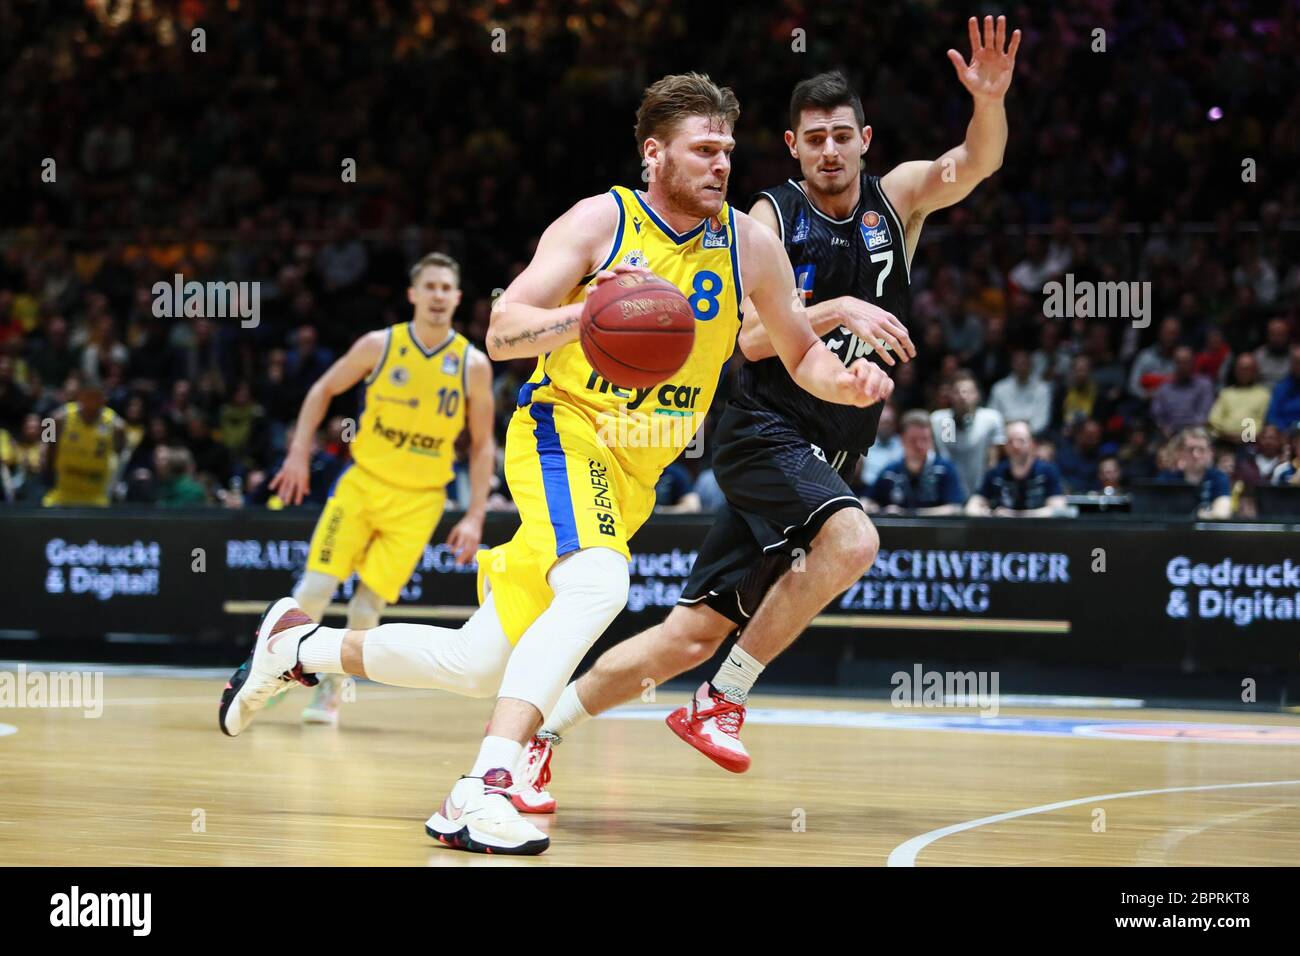 Braunschweig, Germany, December 27, 2019:Lucca Staiger of Lowen Braunschweig in action during the Basketball BBL Bundesliga game Stock Photo